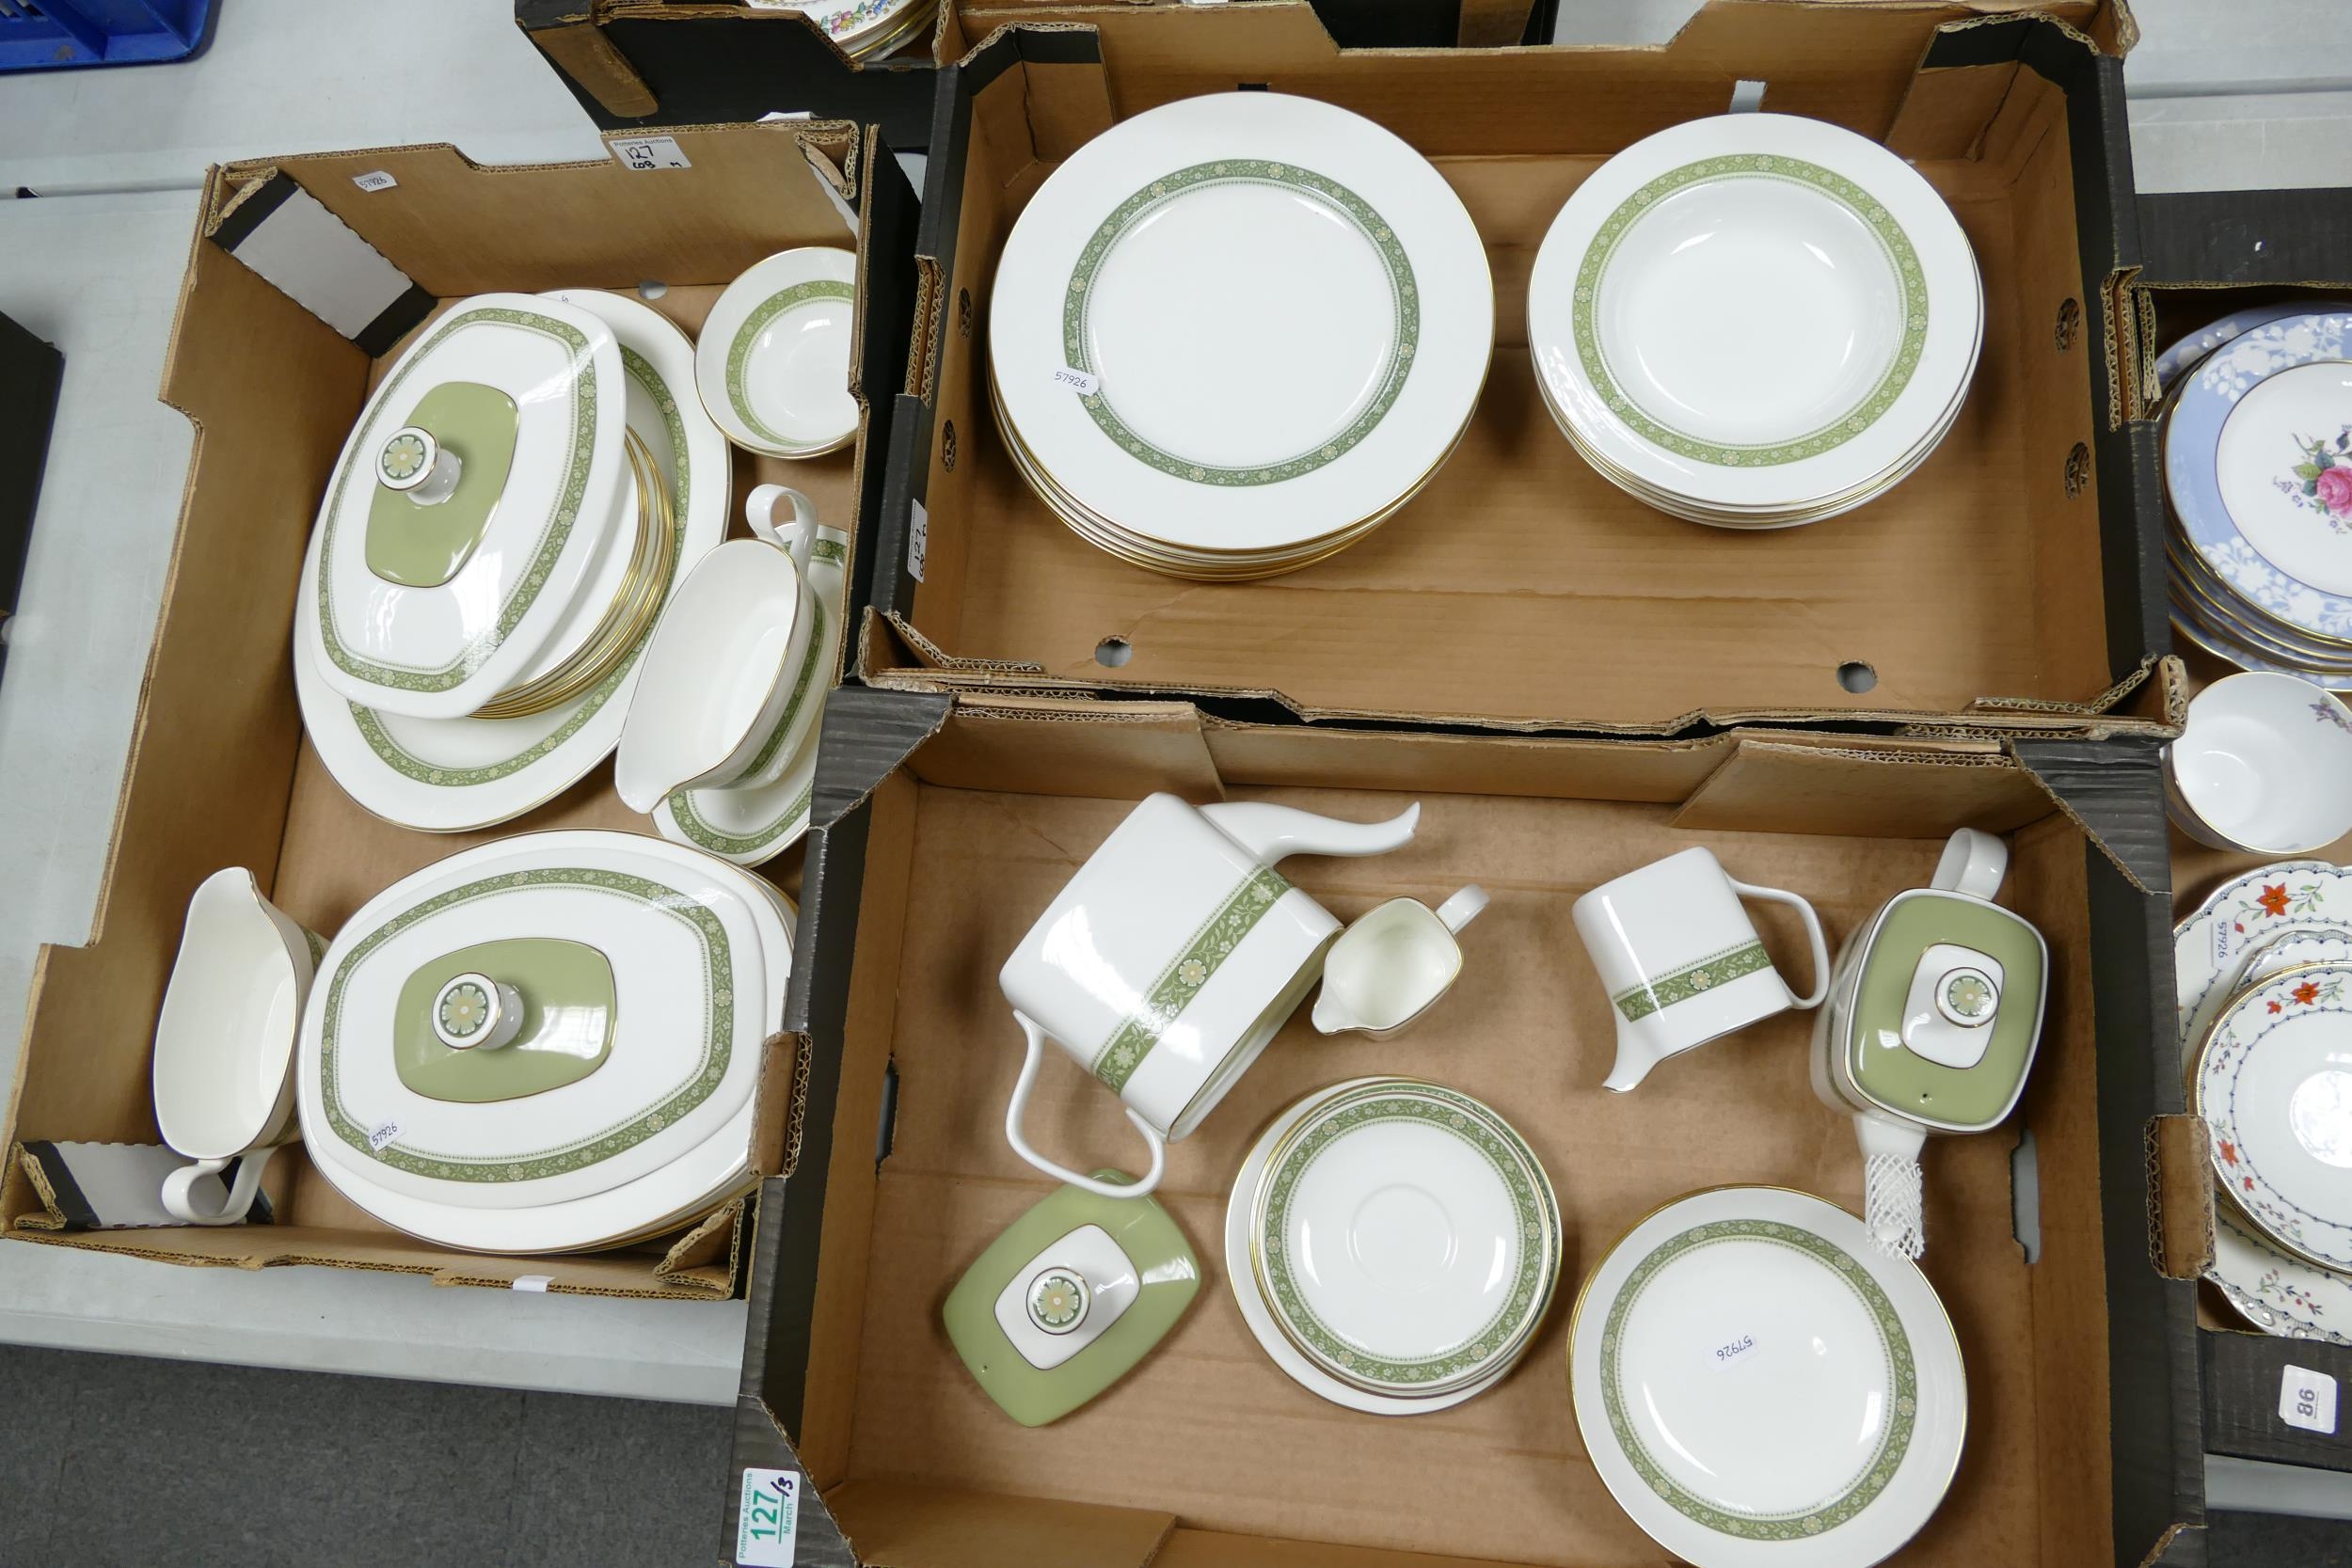 Royal Doulton Roundelay patterned tea & dinner ware to include dinner plates, rimmed bowls, platters